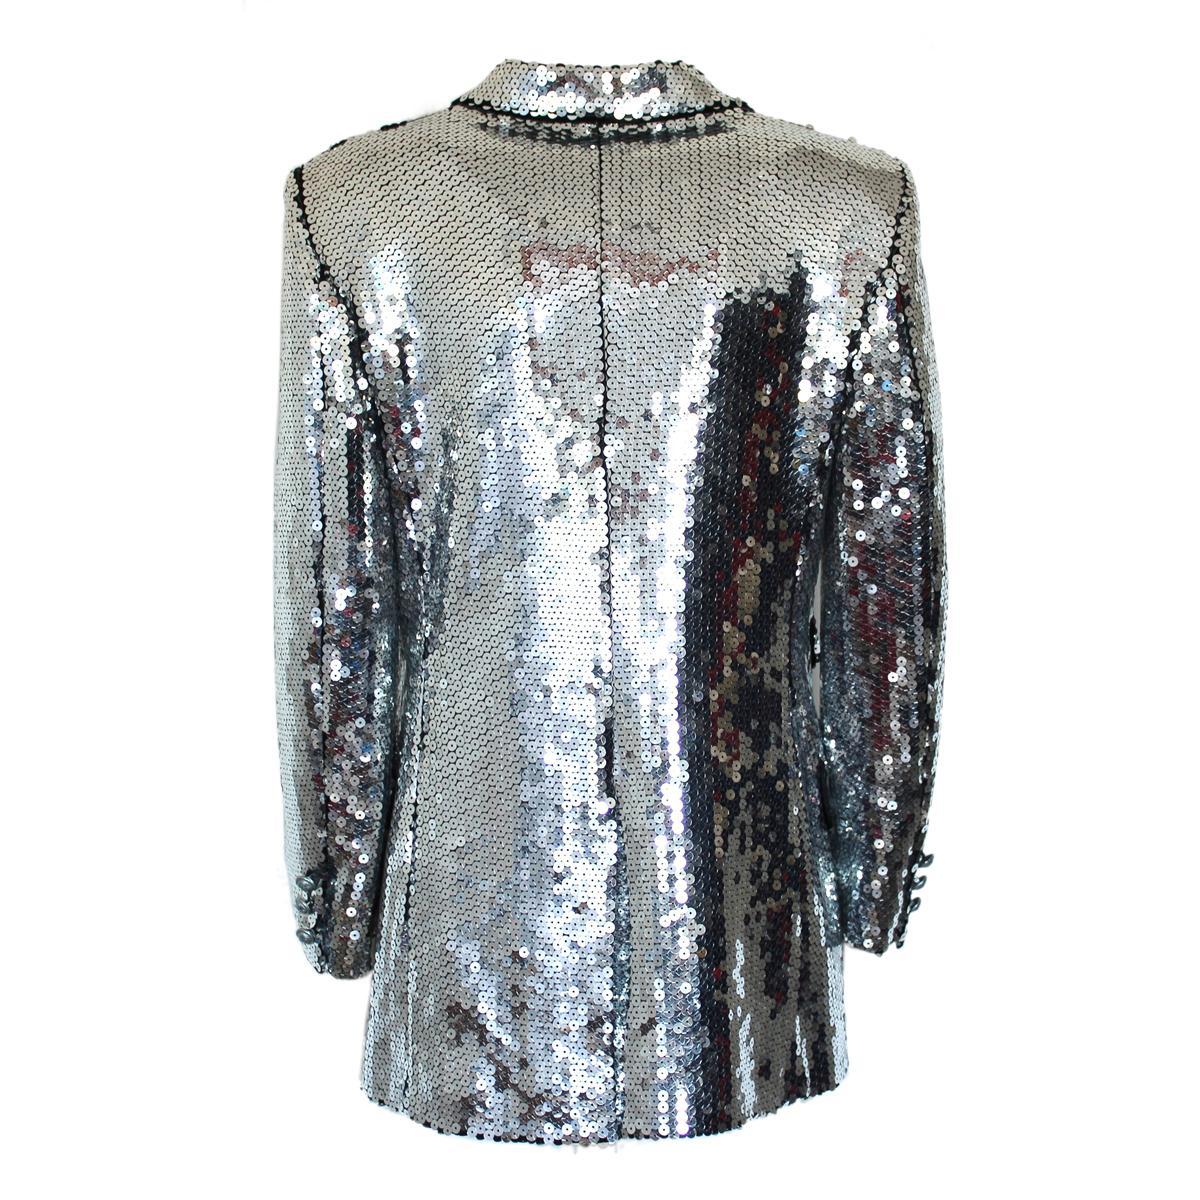 Rare and exclusive piece
Moschino Cheap and Chic
Vintage of early 90's
Sequins
Silver color
Four pockets
Three authomatic buttons
Length from shoulder cm 67 (26.3 inches)
Worldwide express shipping included in the price !